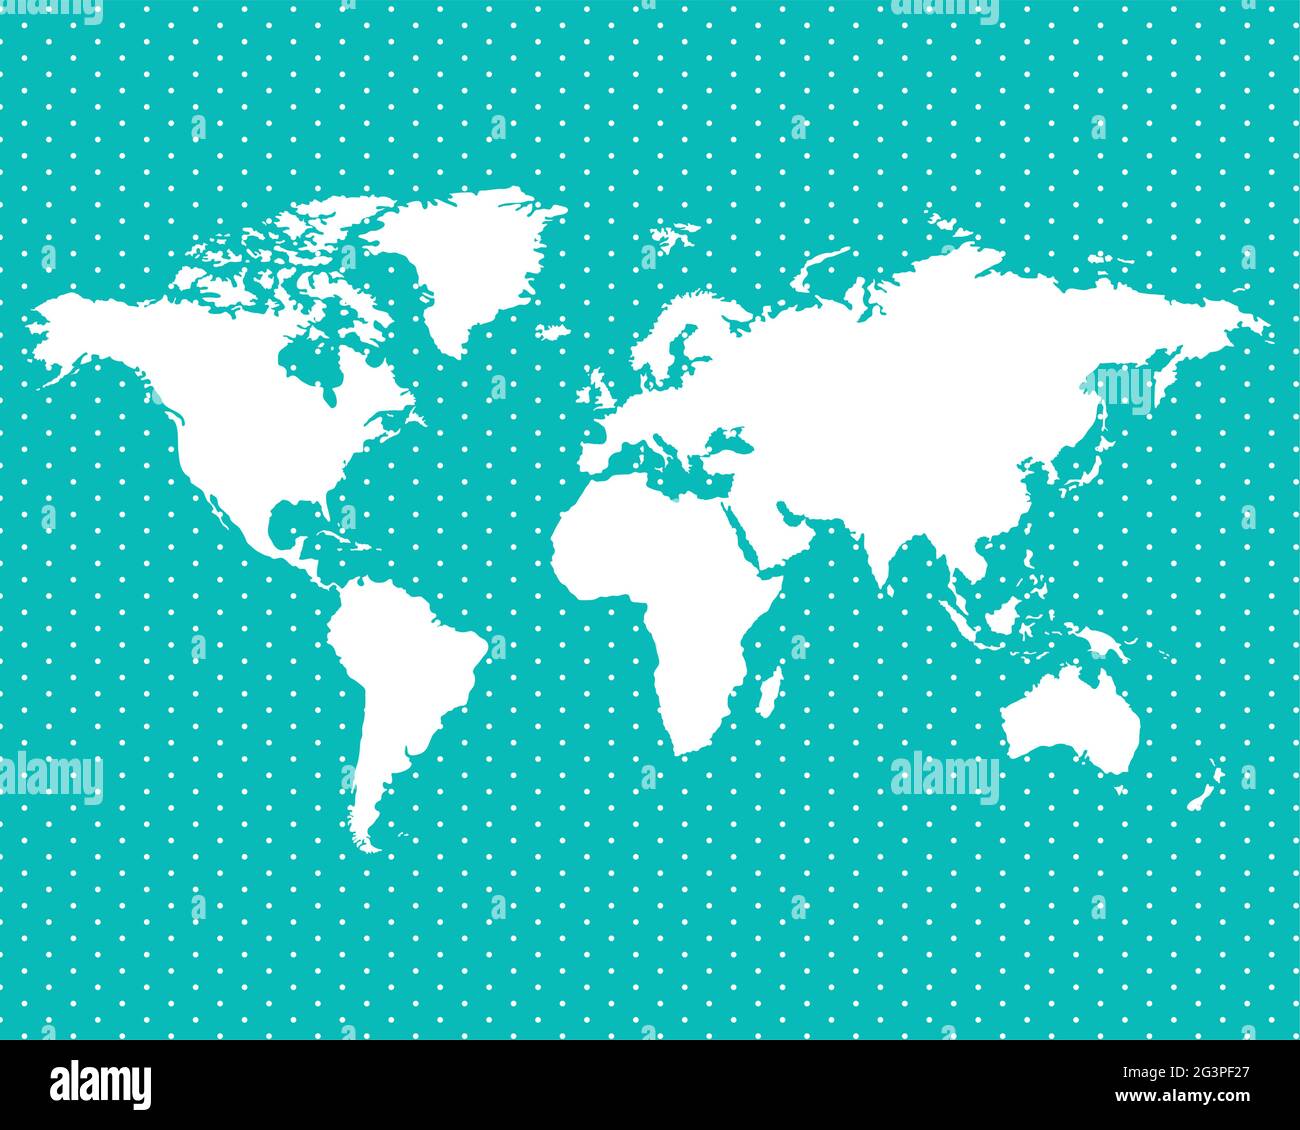 world map on dots Stock Vector